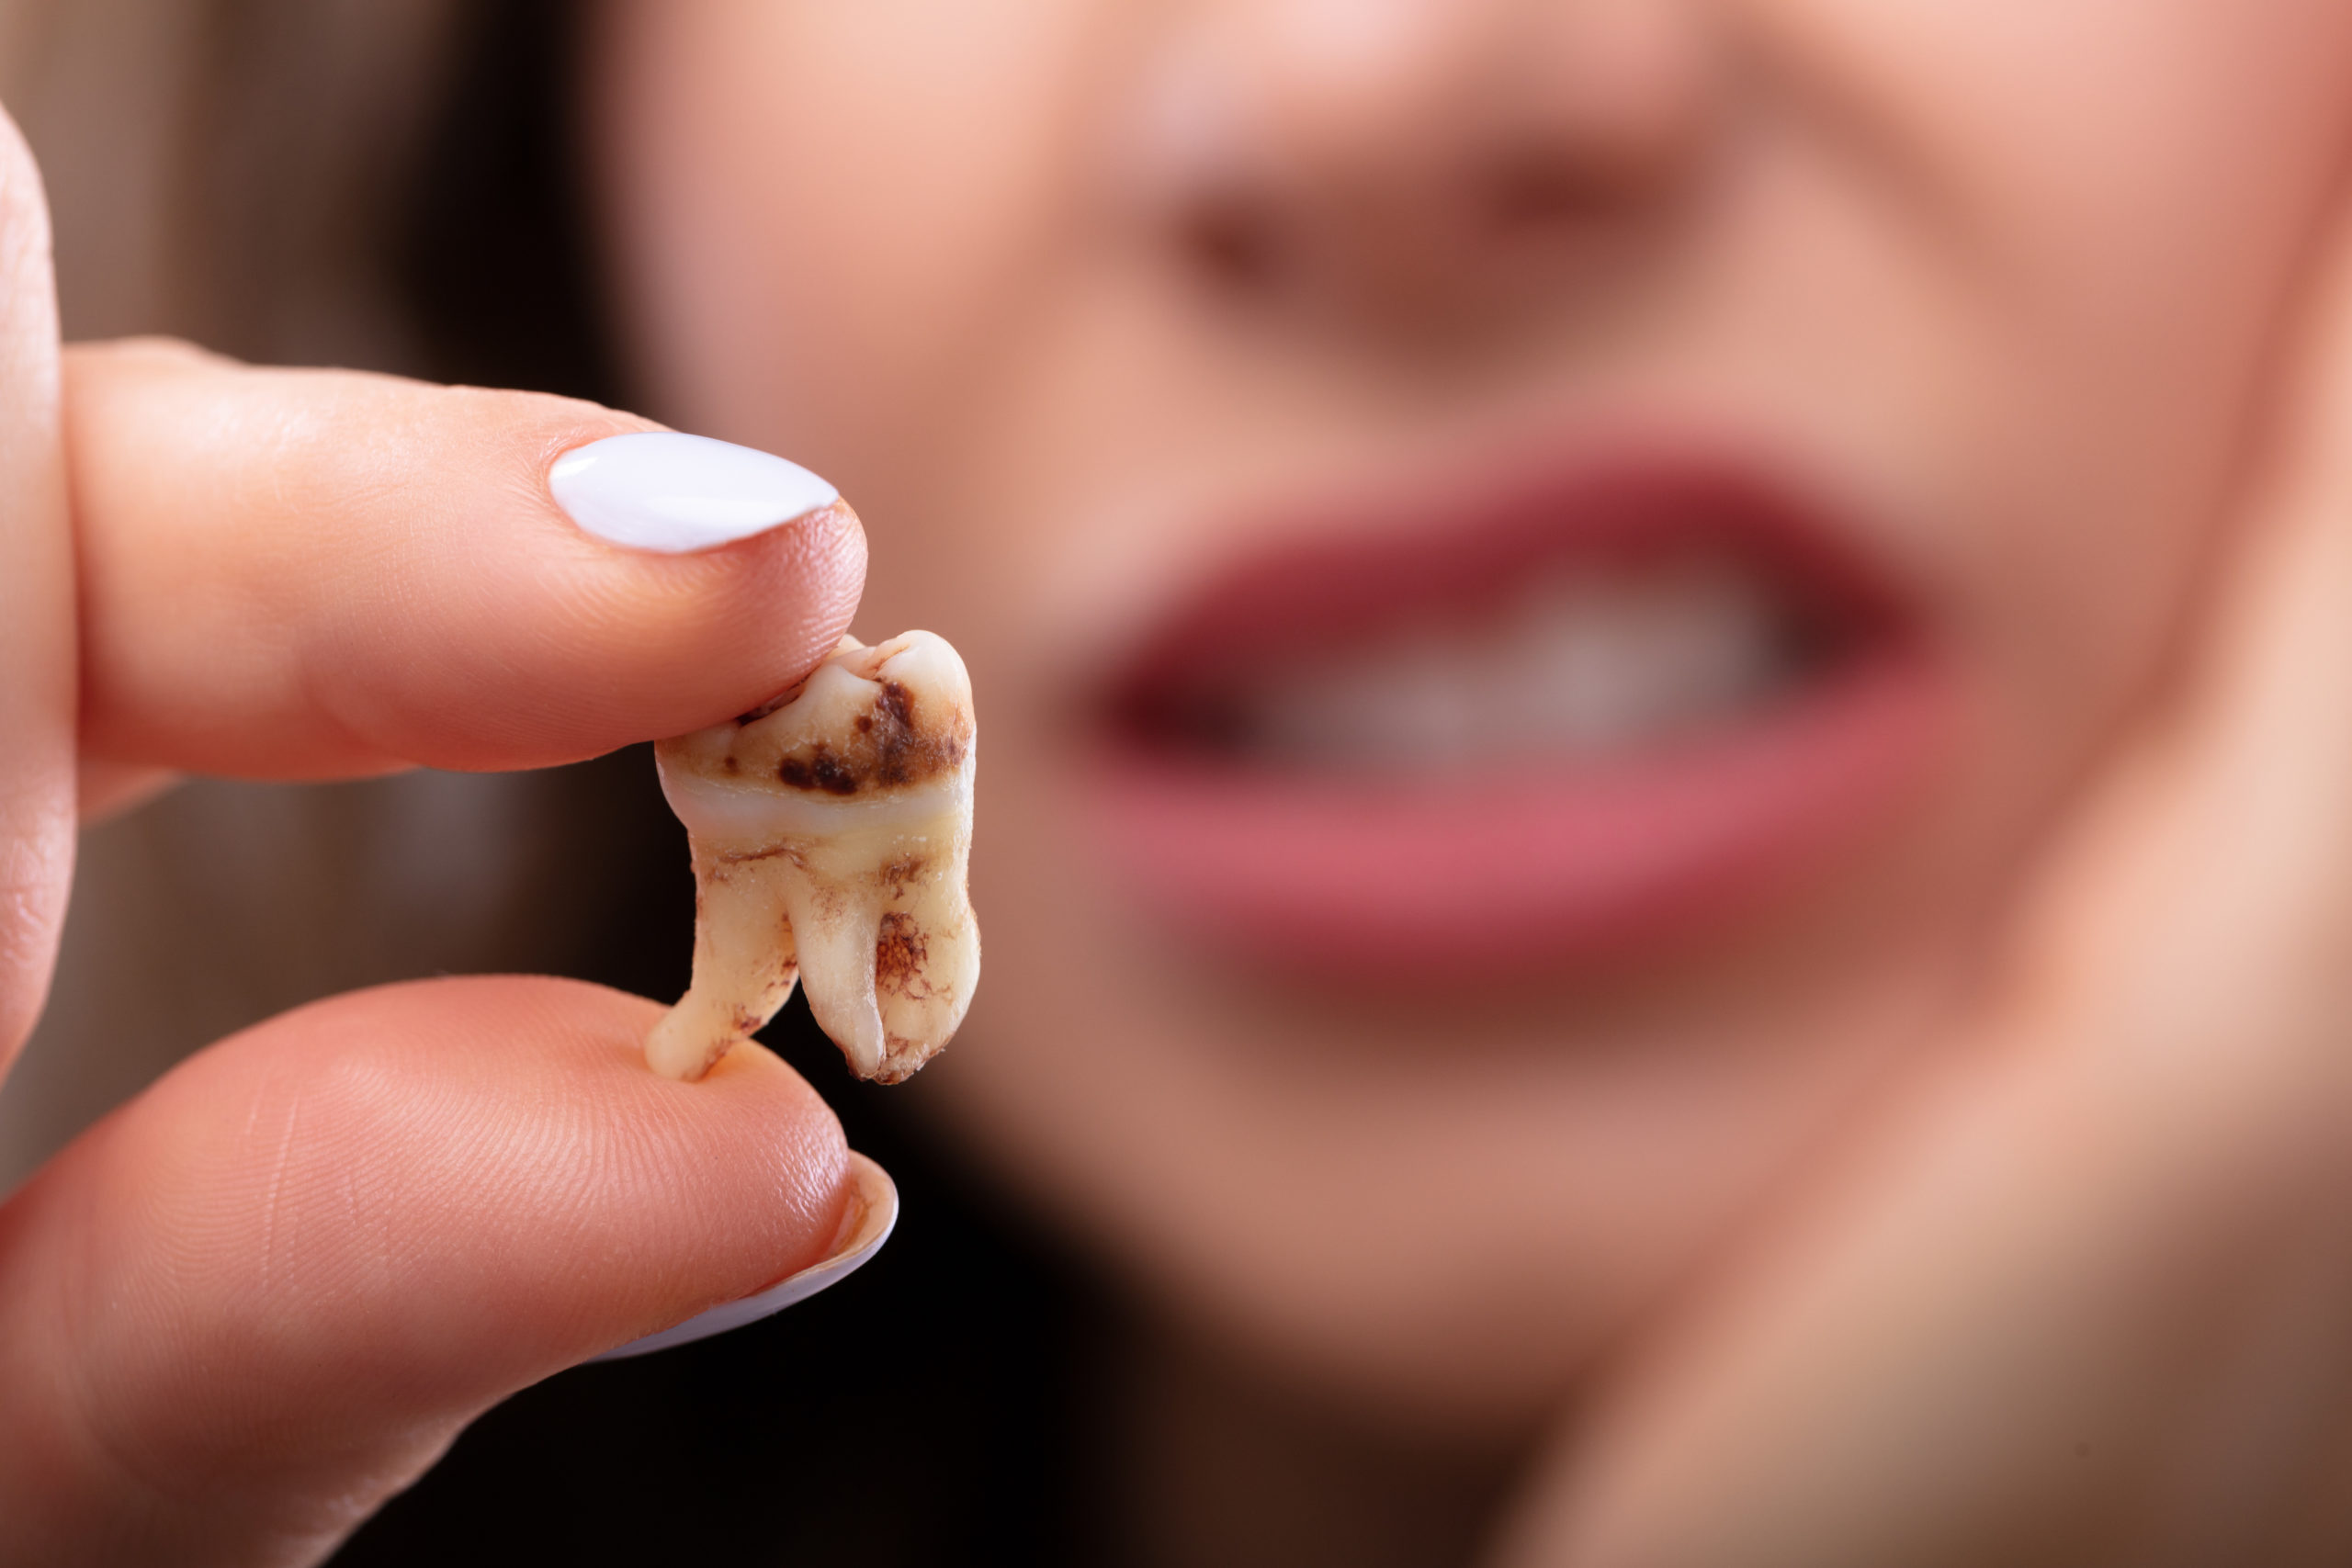 Close-up Of A Woman's Hand Holding Decay Tooth Tooth Decay oral hygiene
